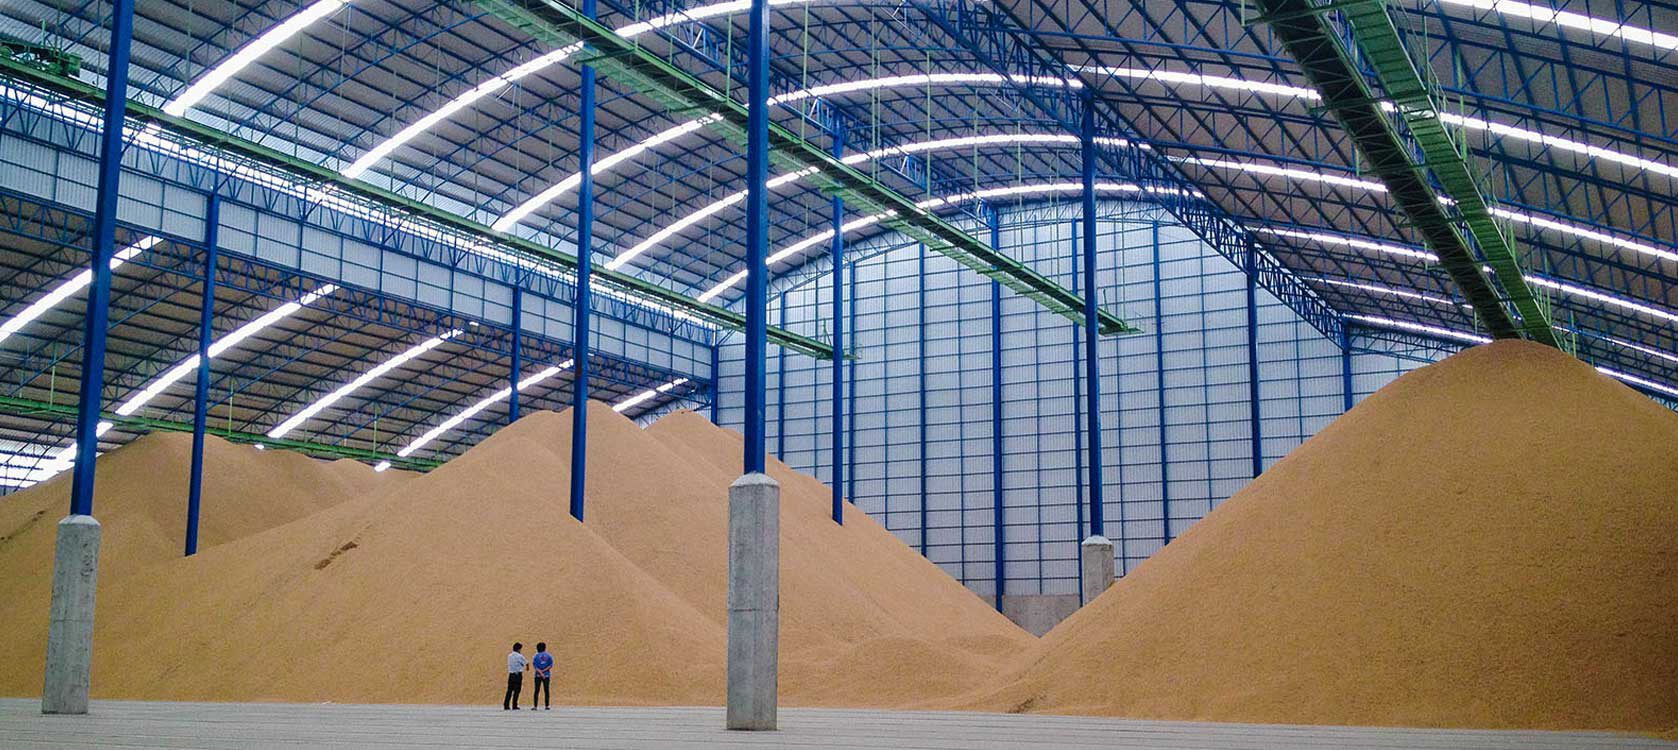 How to manage massive quantity of grain intake?